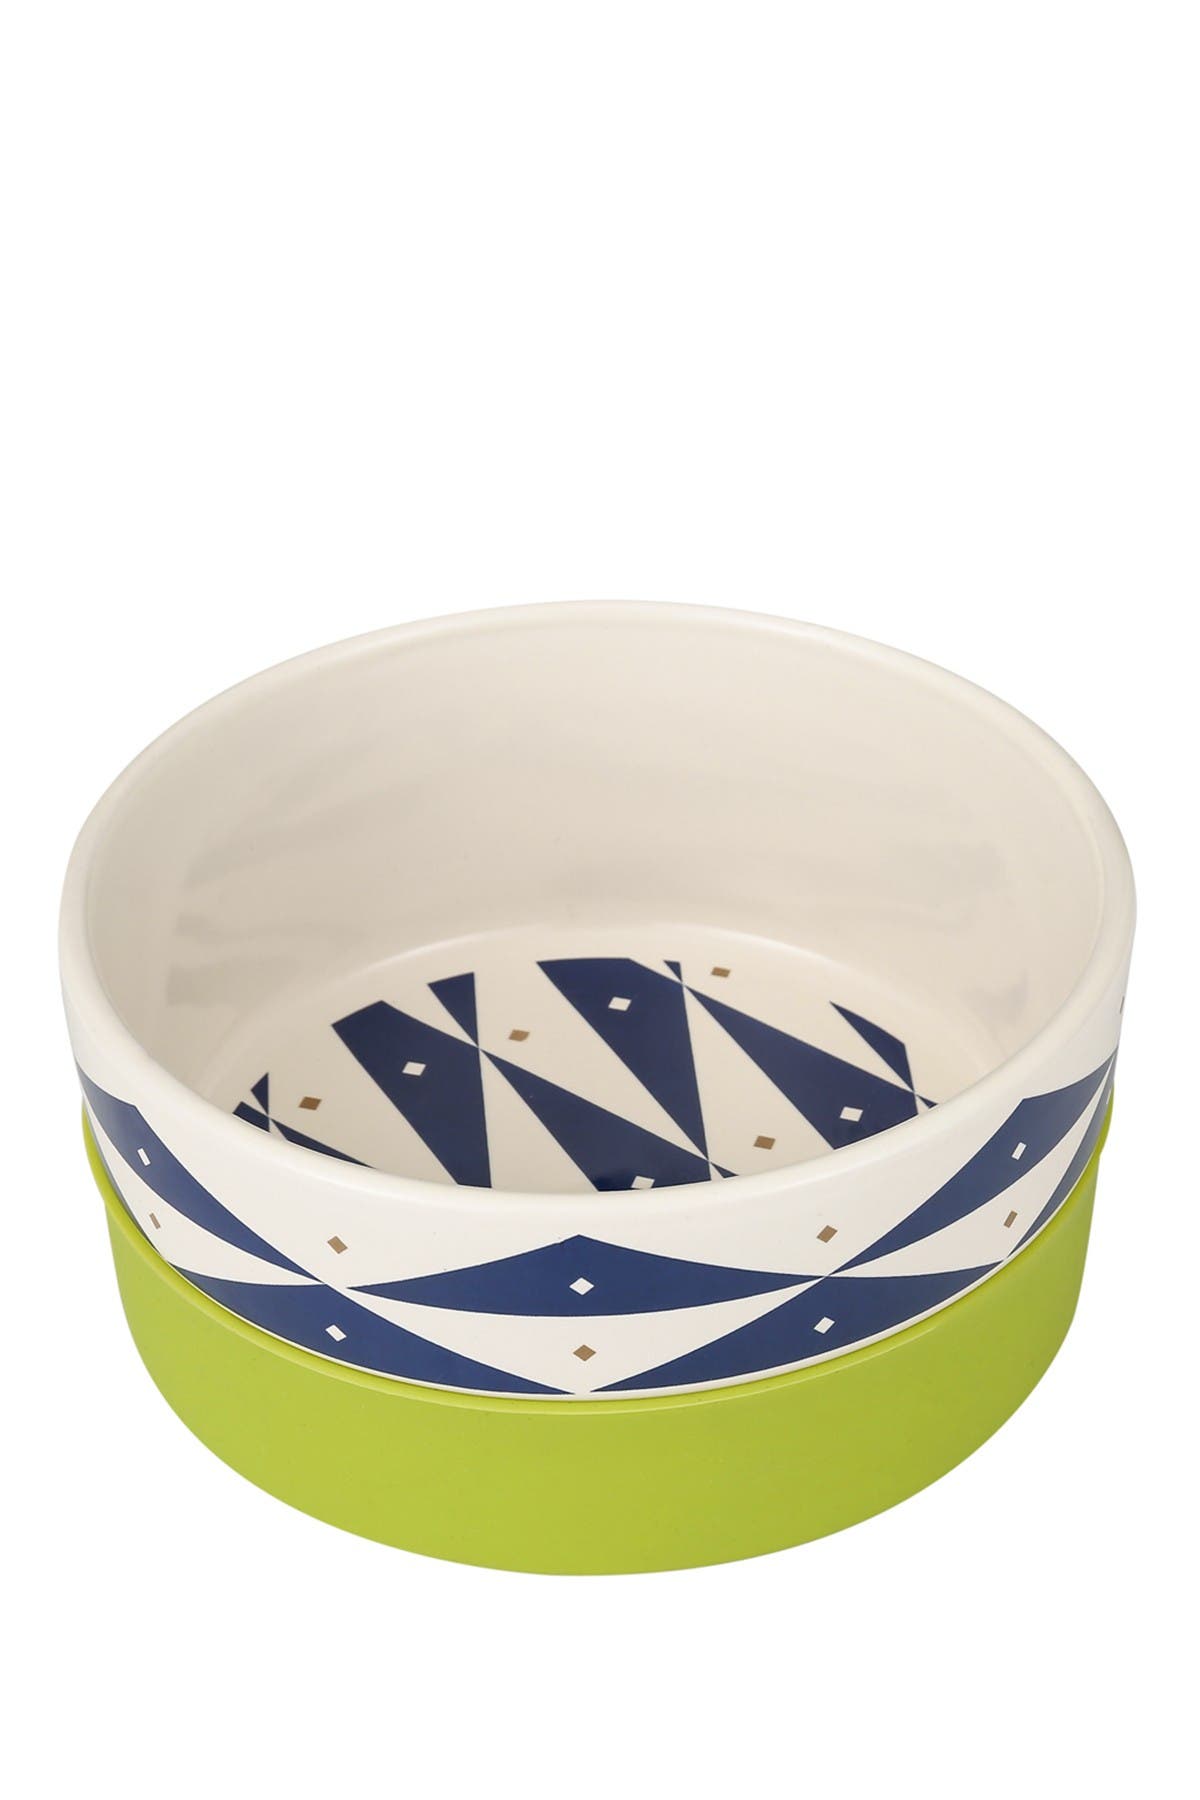 Fetch 4 Pets Jonathan Adler: Now House "oslo" Duo Dog Bowl In Blue